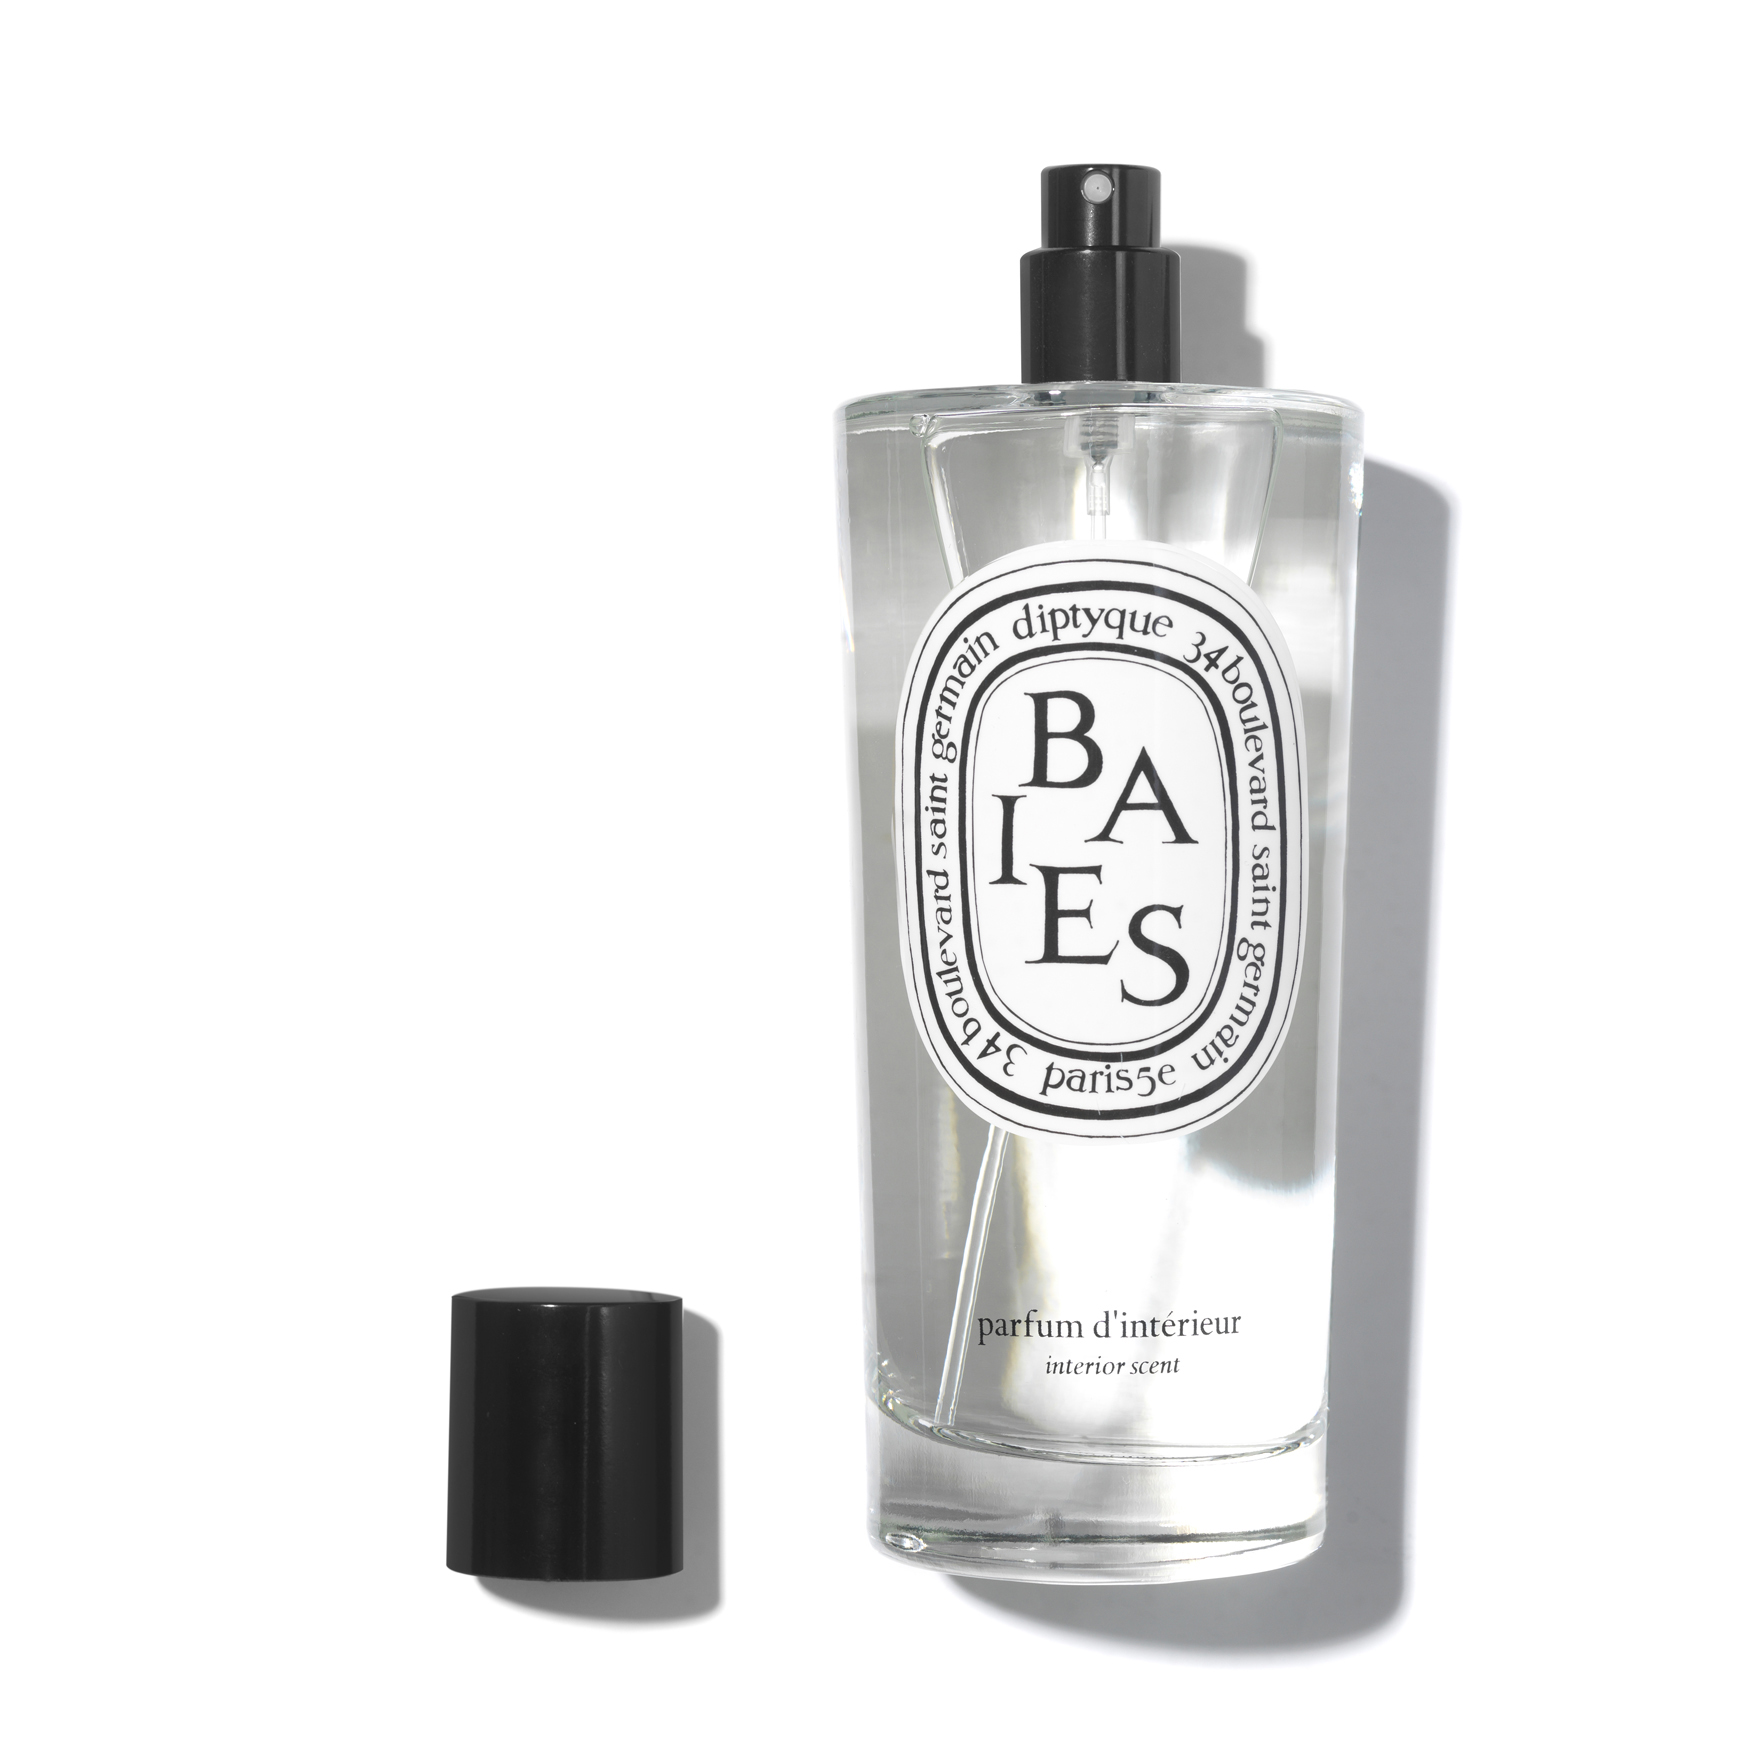 Diptyque Spray d'ambiance Baies | Space NK